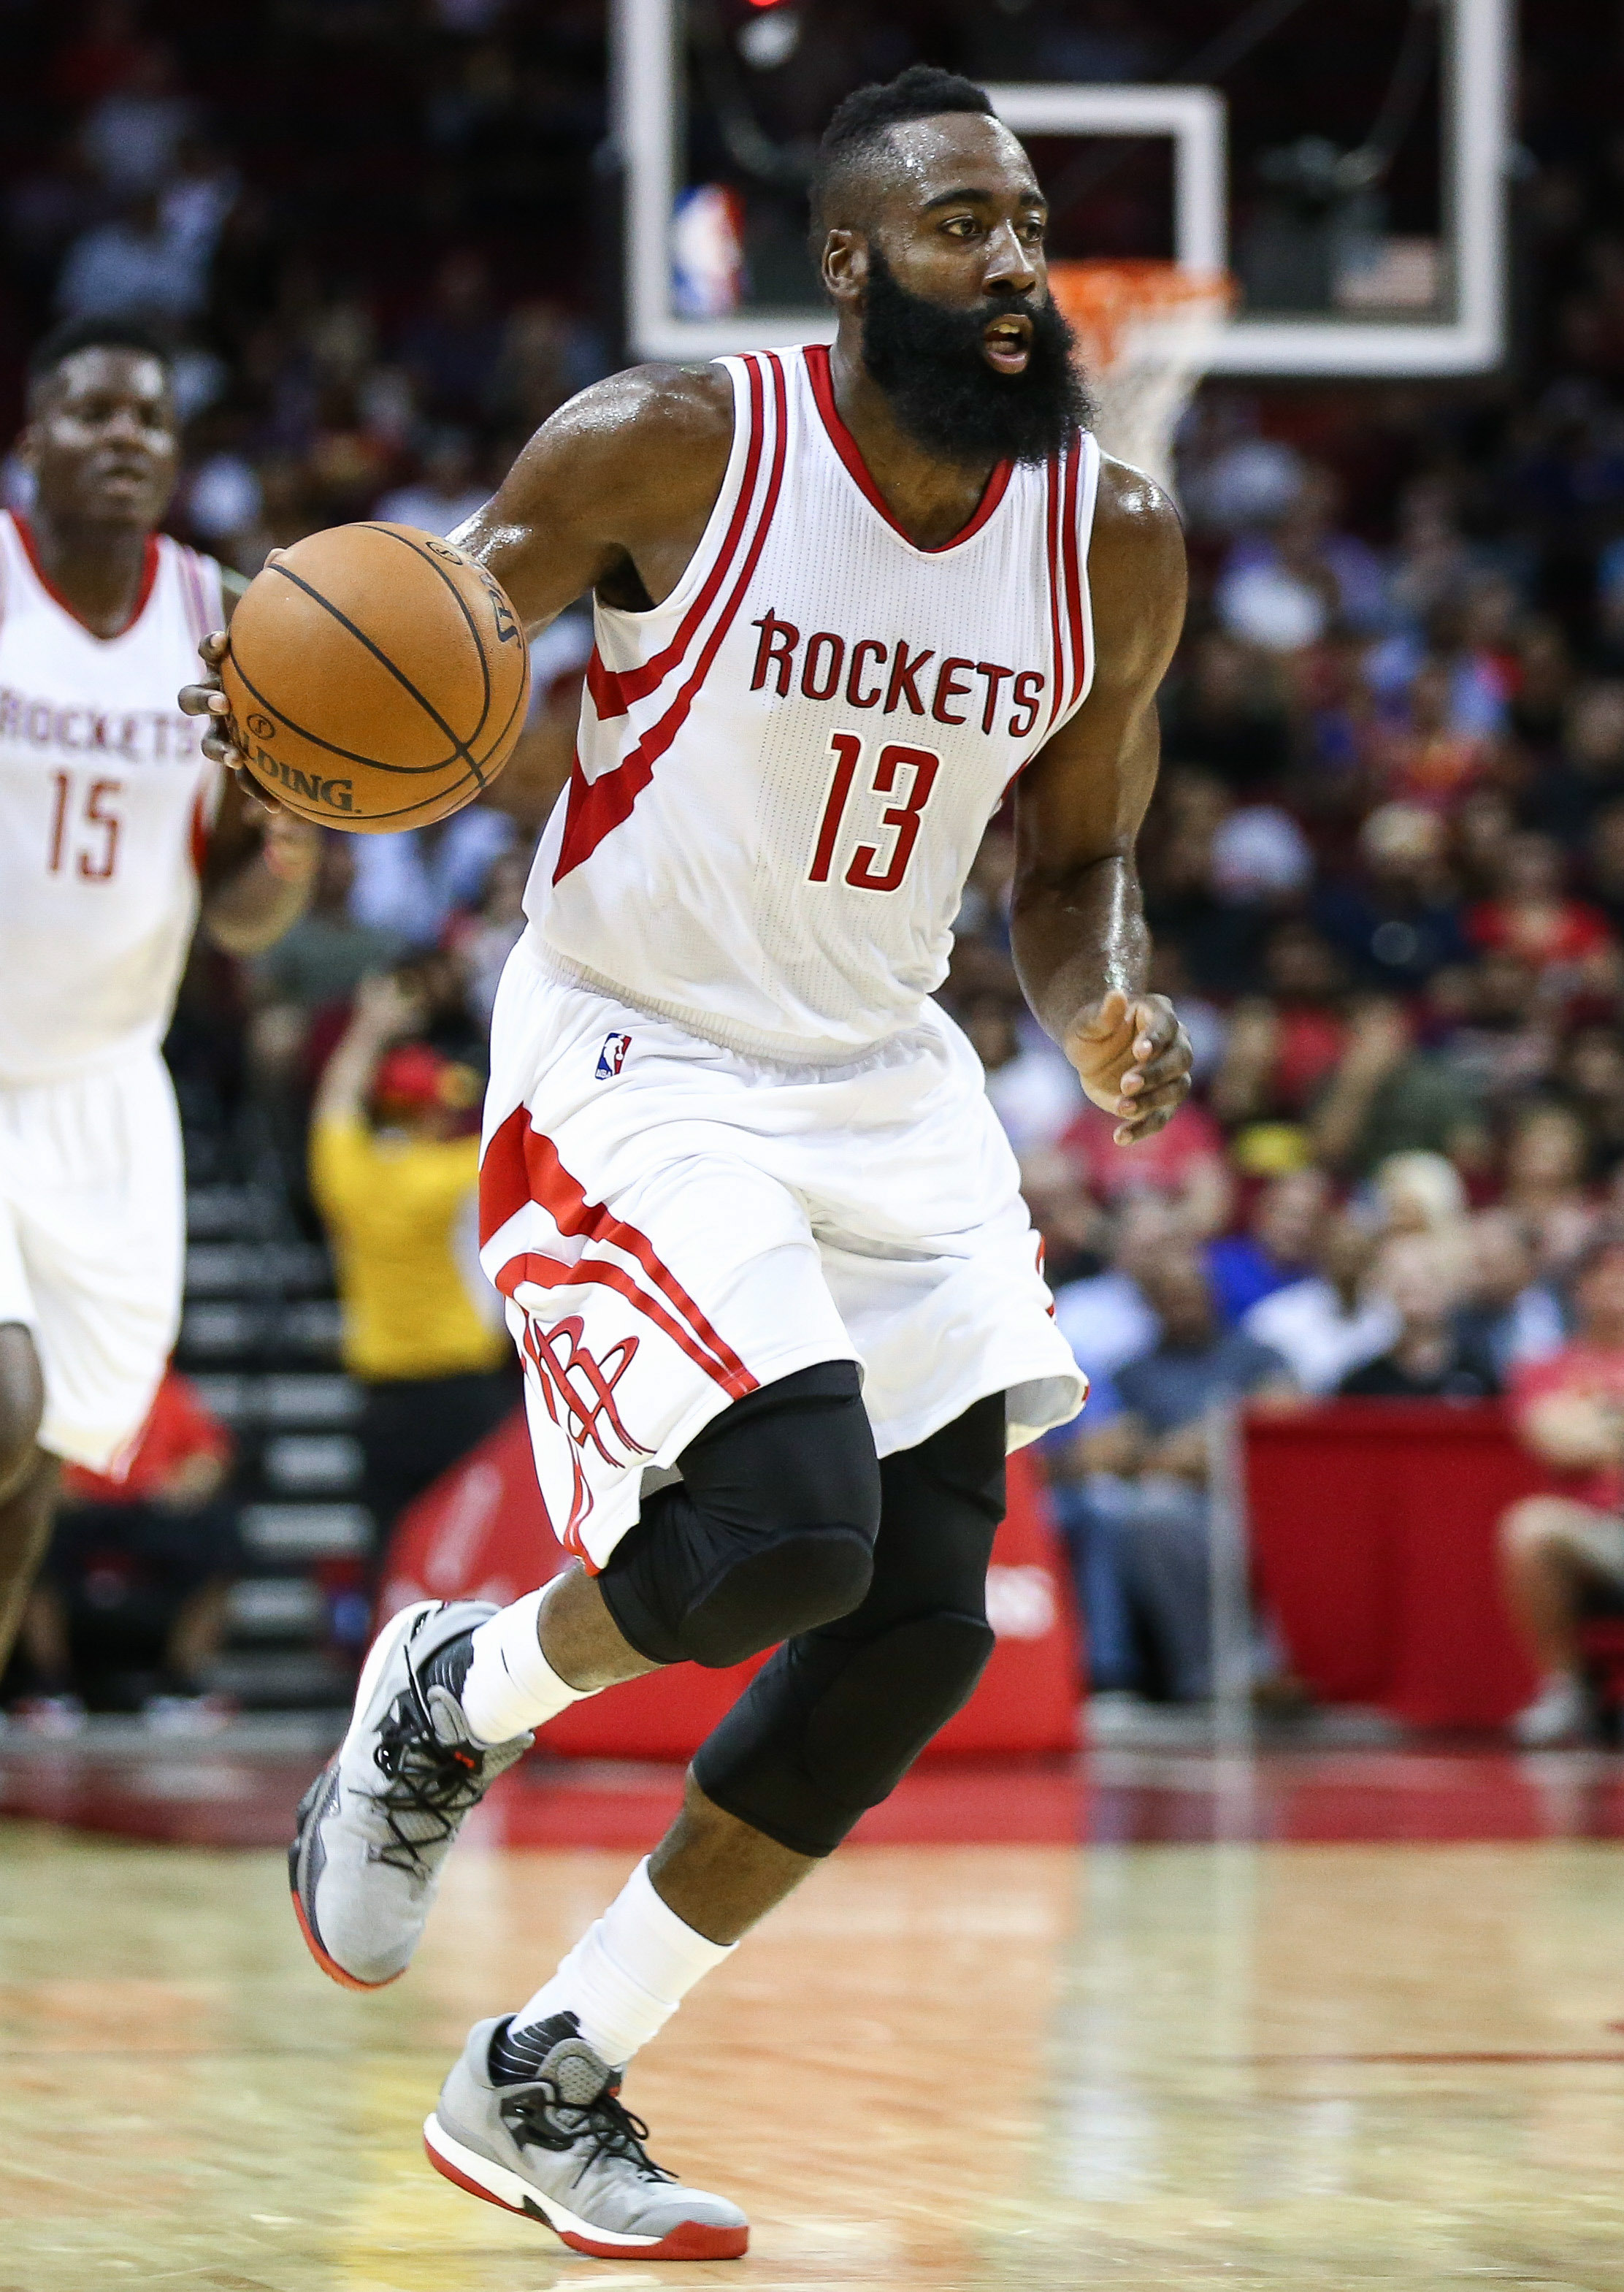 Newly acquired Harden agrees on extension with Rockets